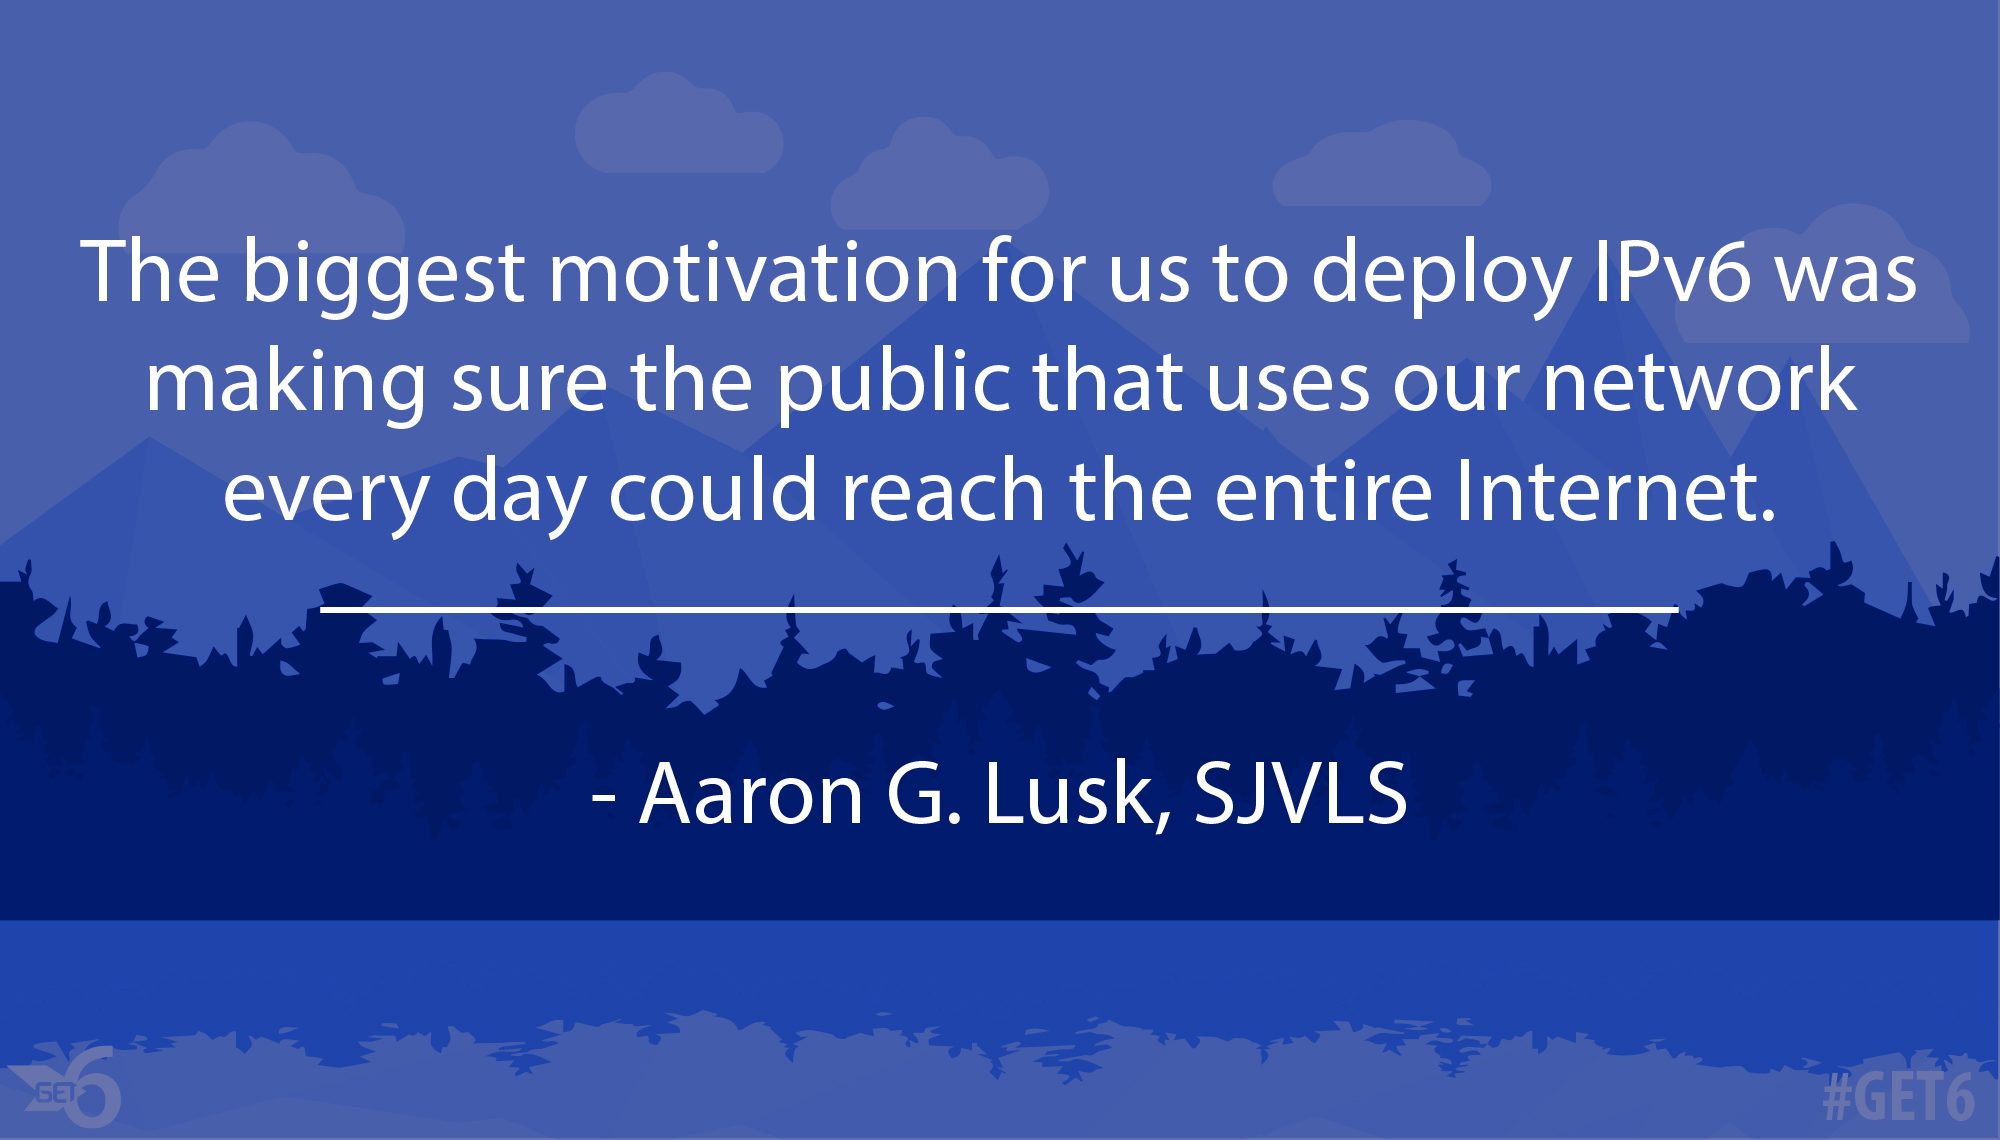 “The biggest motivation for us to deploy IPv6 was making sure the public that uses our network everyday could reach the entire Internet.